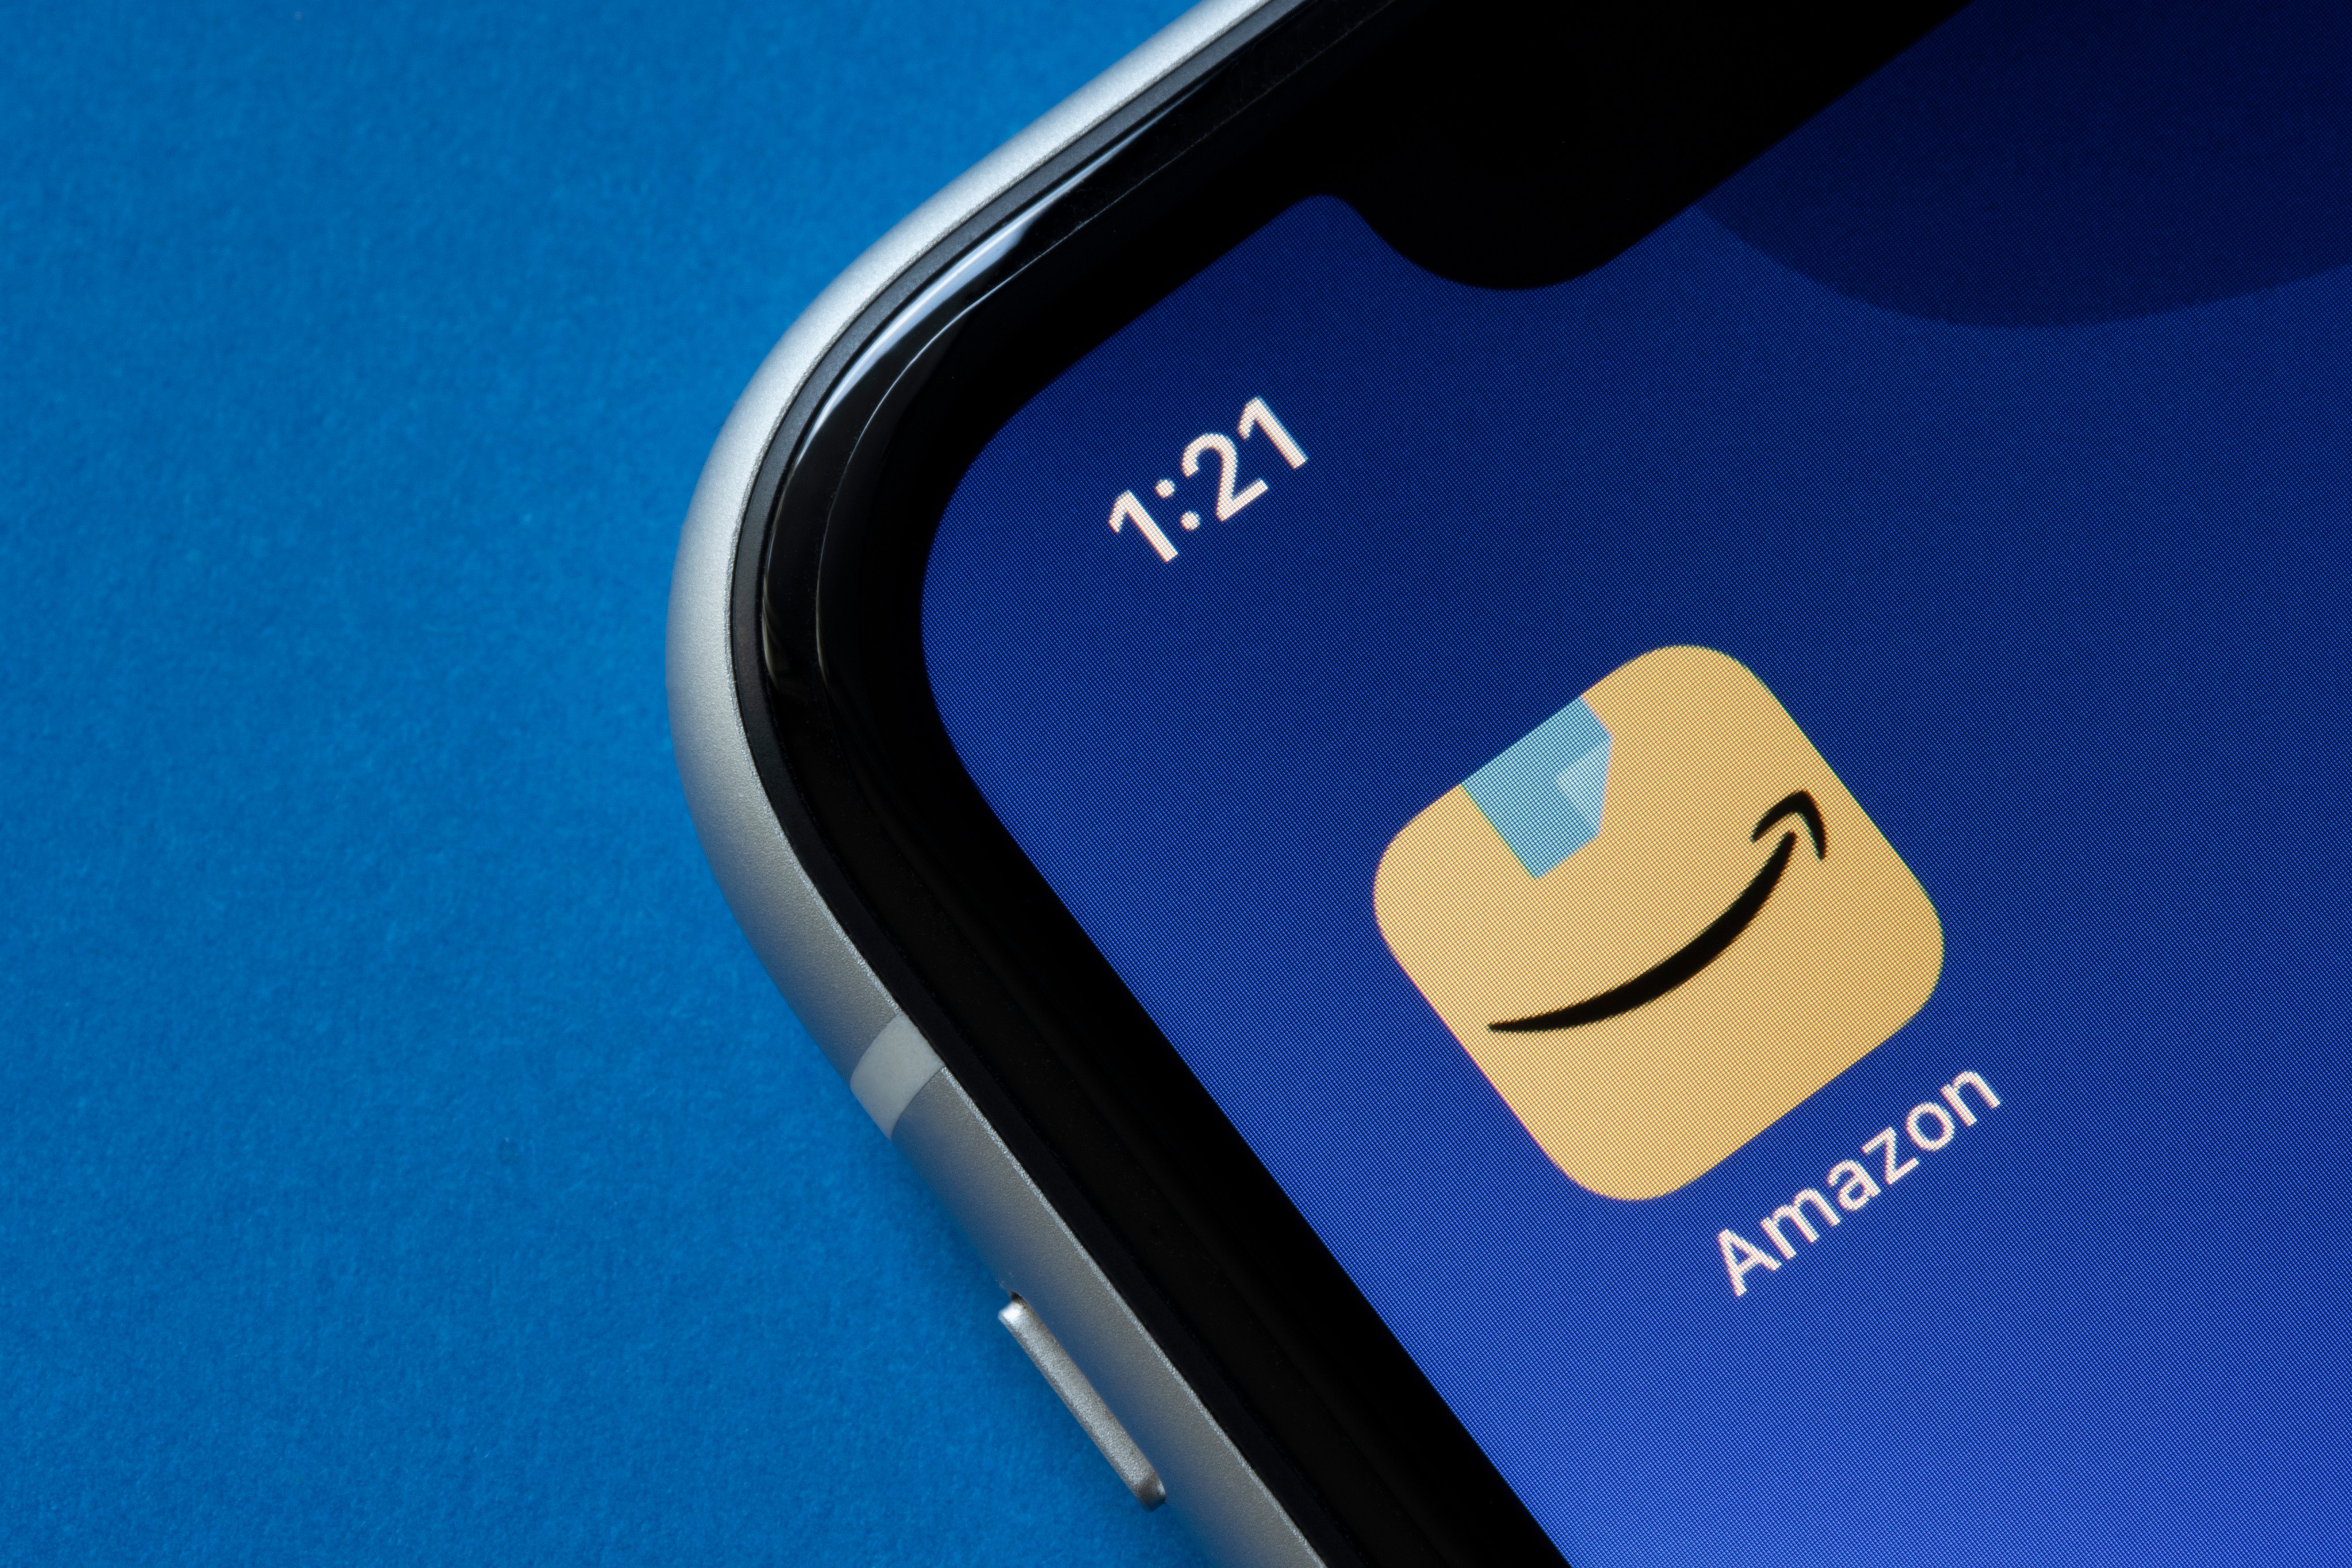 Amazon and Cartier’s joint lawsuits filed on June 15, 2022, reflect more signs of trouble for Chinese vendors on the US online shopping platform. Photo: Shutterstock